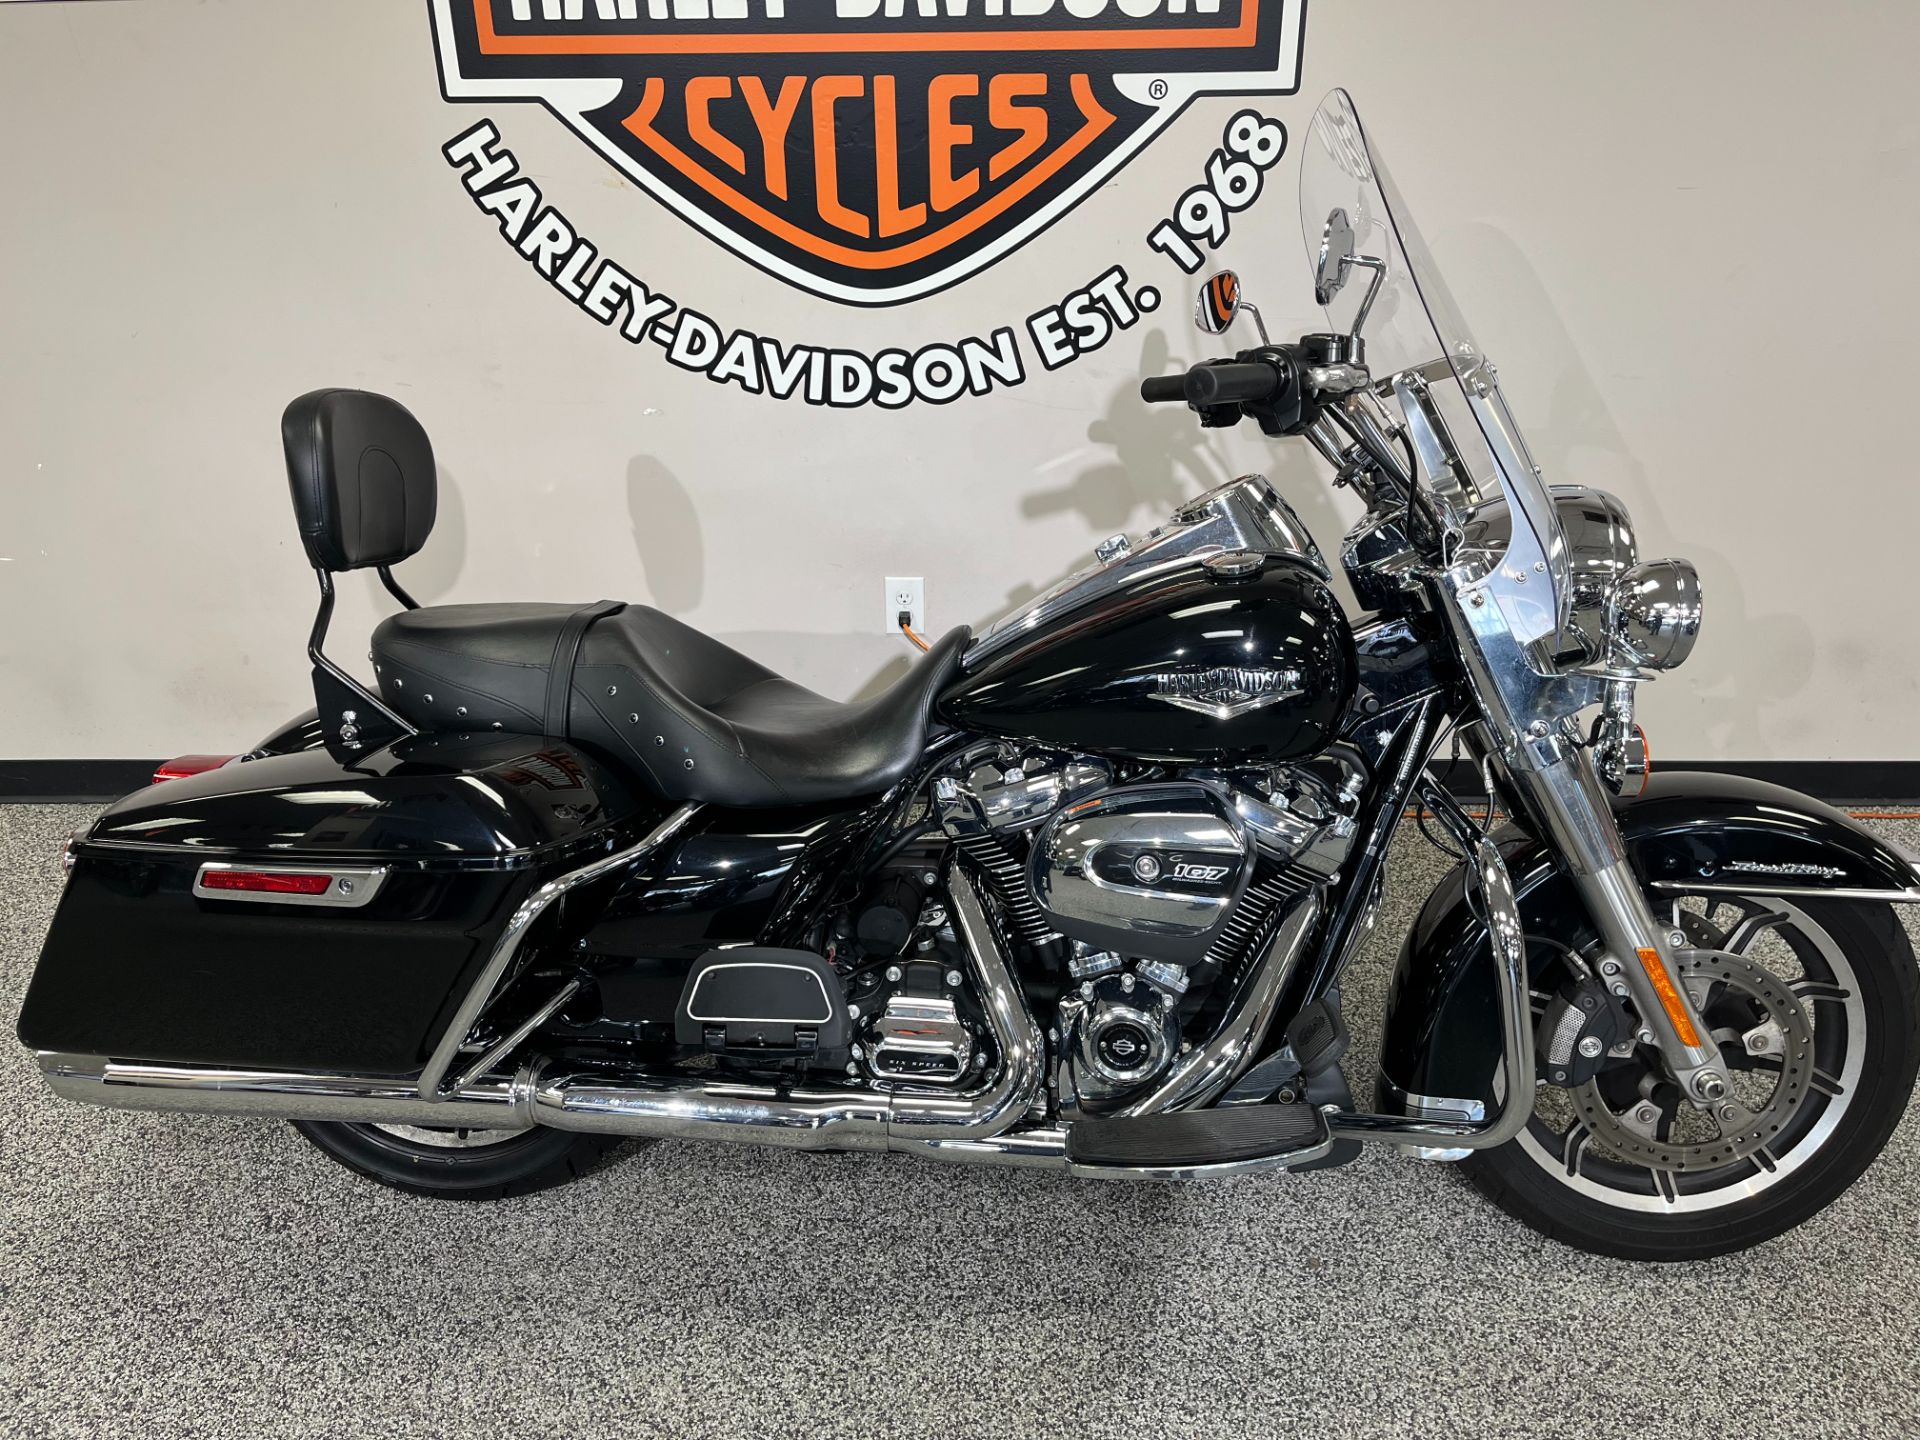 2019 Harley-Davidson ROAD KING in Knoxville, Tennessee - Photo 2